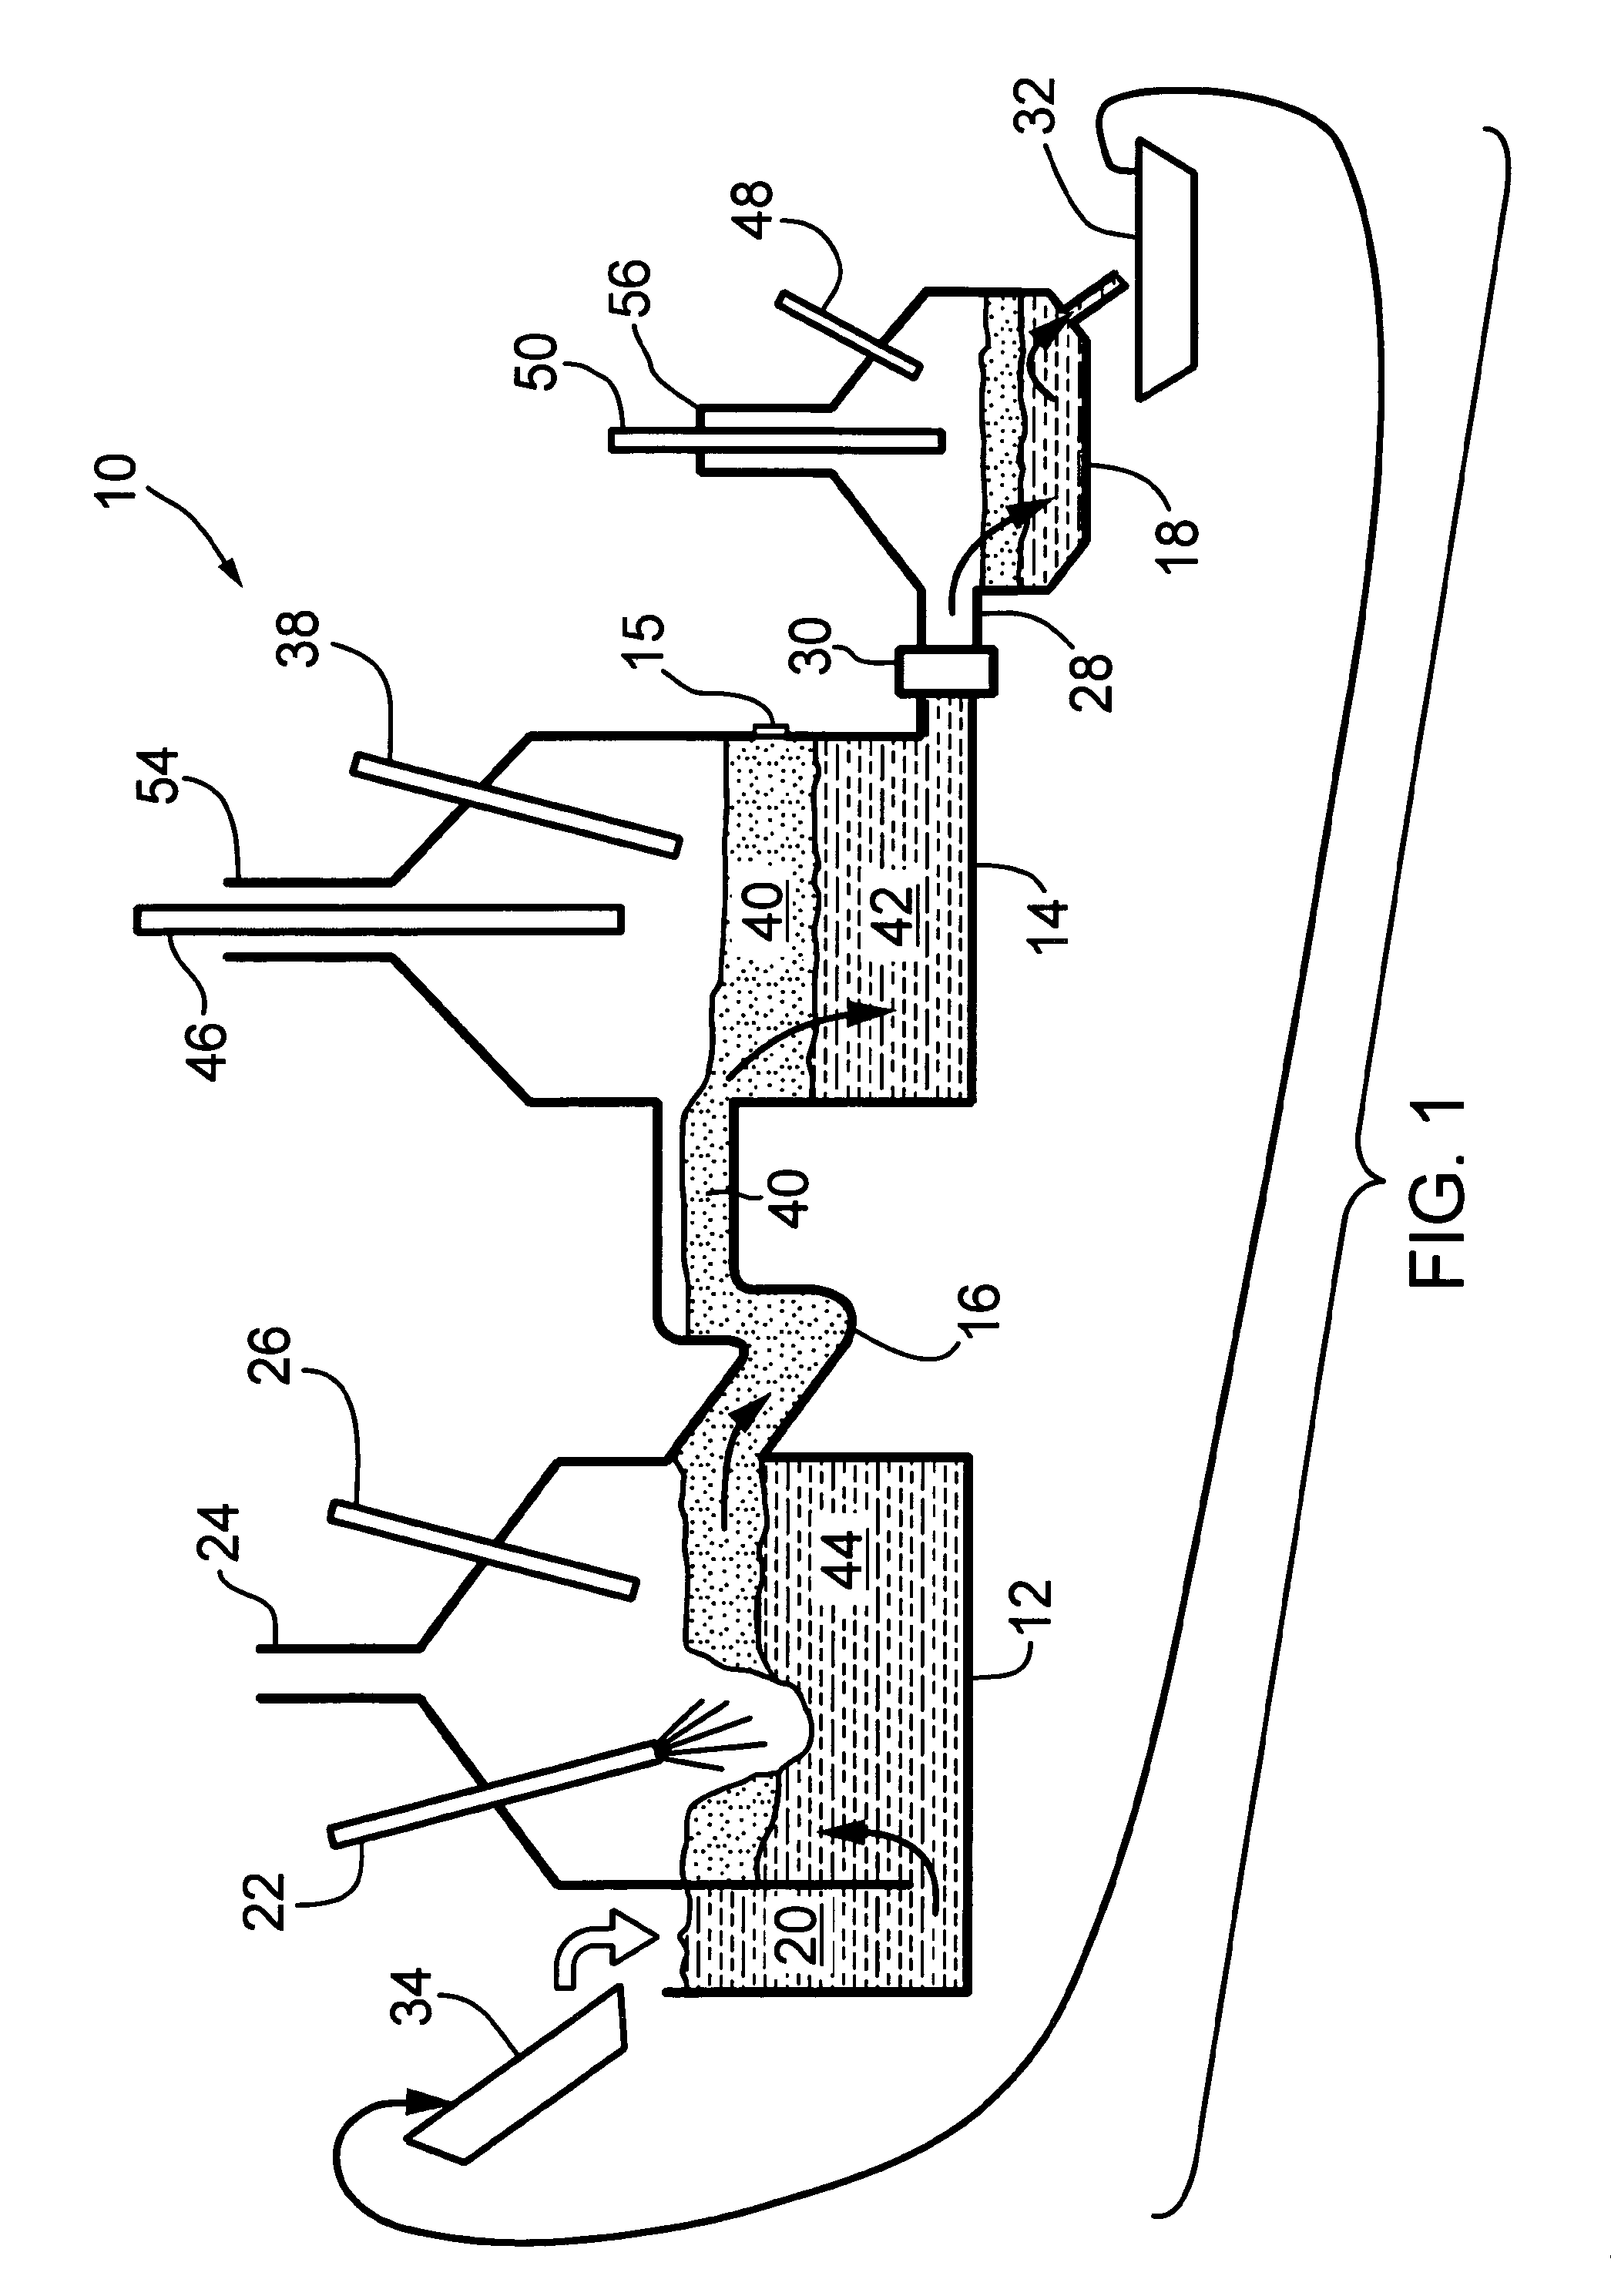 Reactor and process for the continuous production of hydrogen based on steam oxidation of molten iron